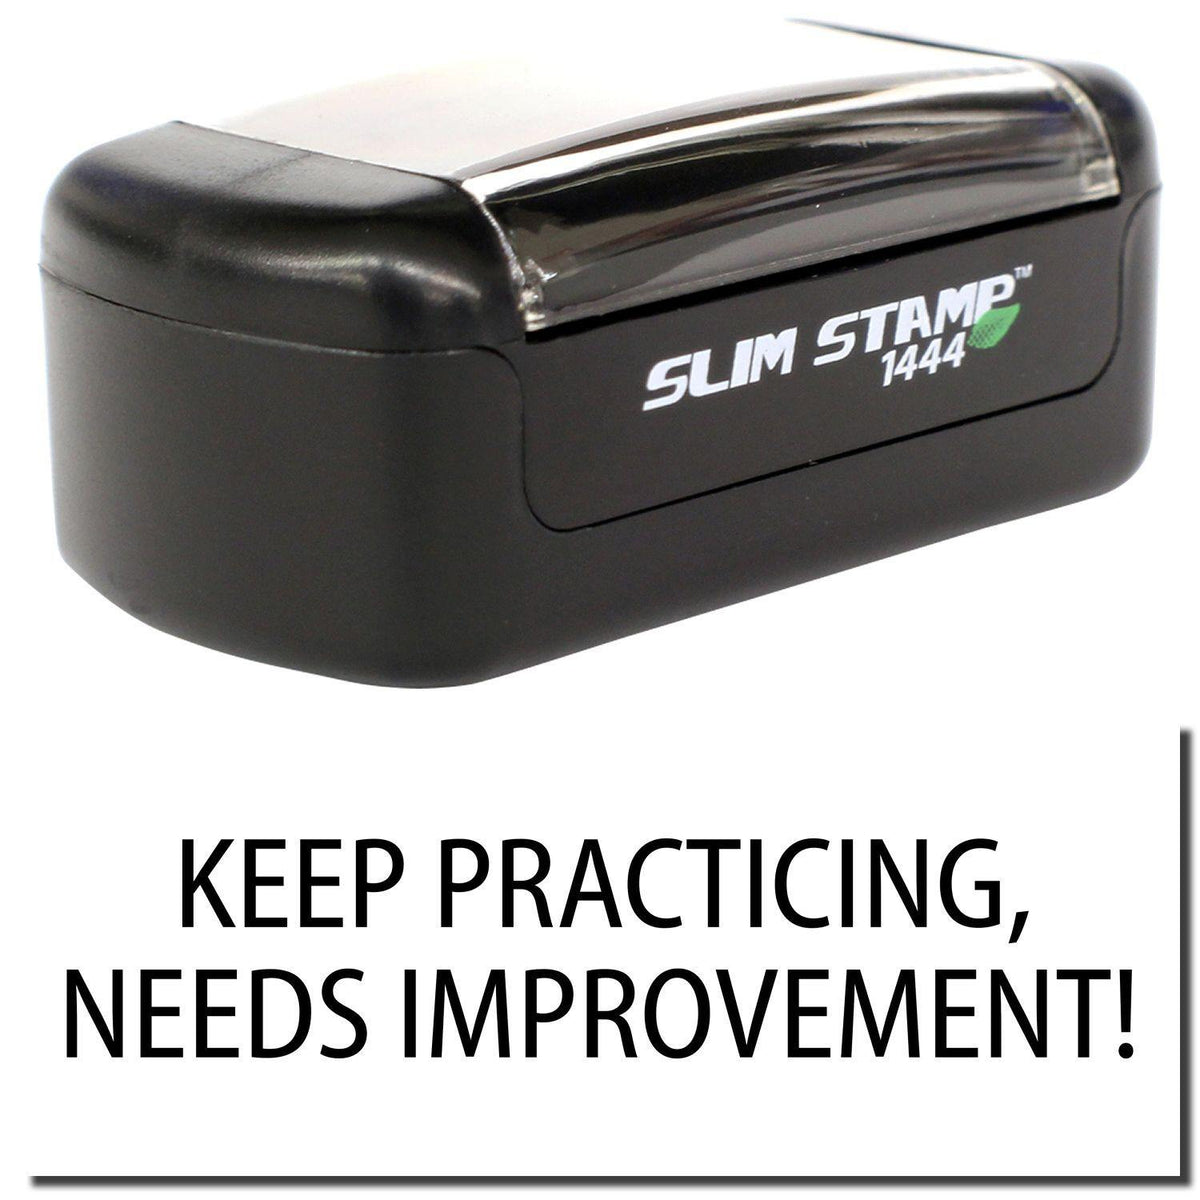 A stock office pre-inked stamp with a stamped image showing how the text &quot;KEEP PRACTICING, NEEDS IMPROVEMENT!&quot; is displayed after stamping.